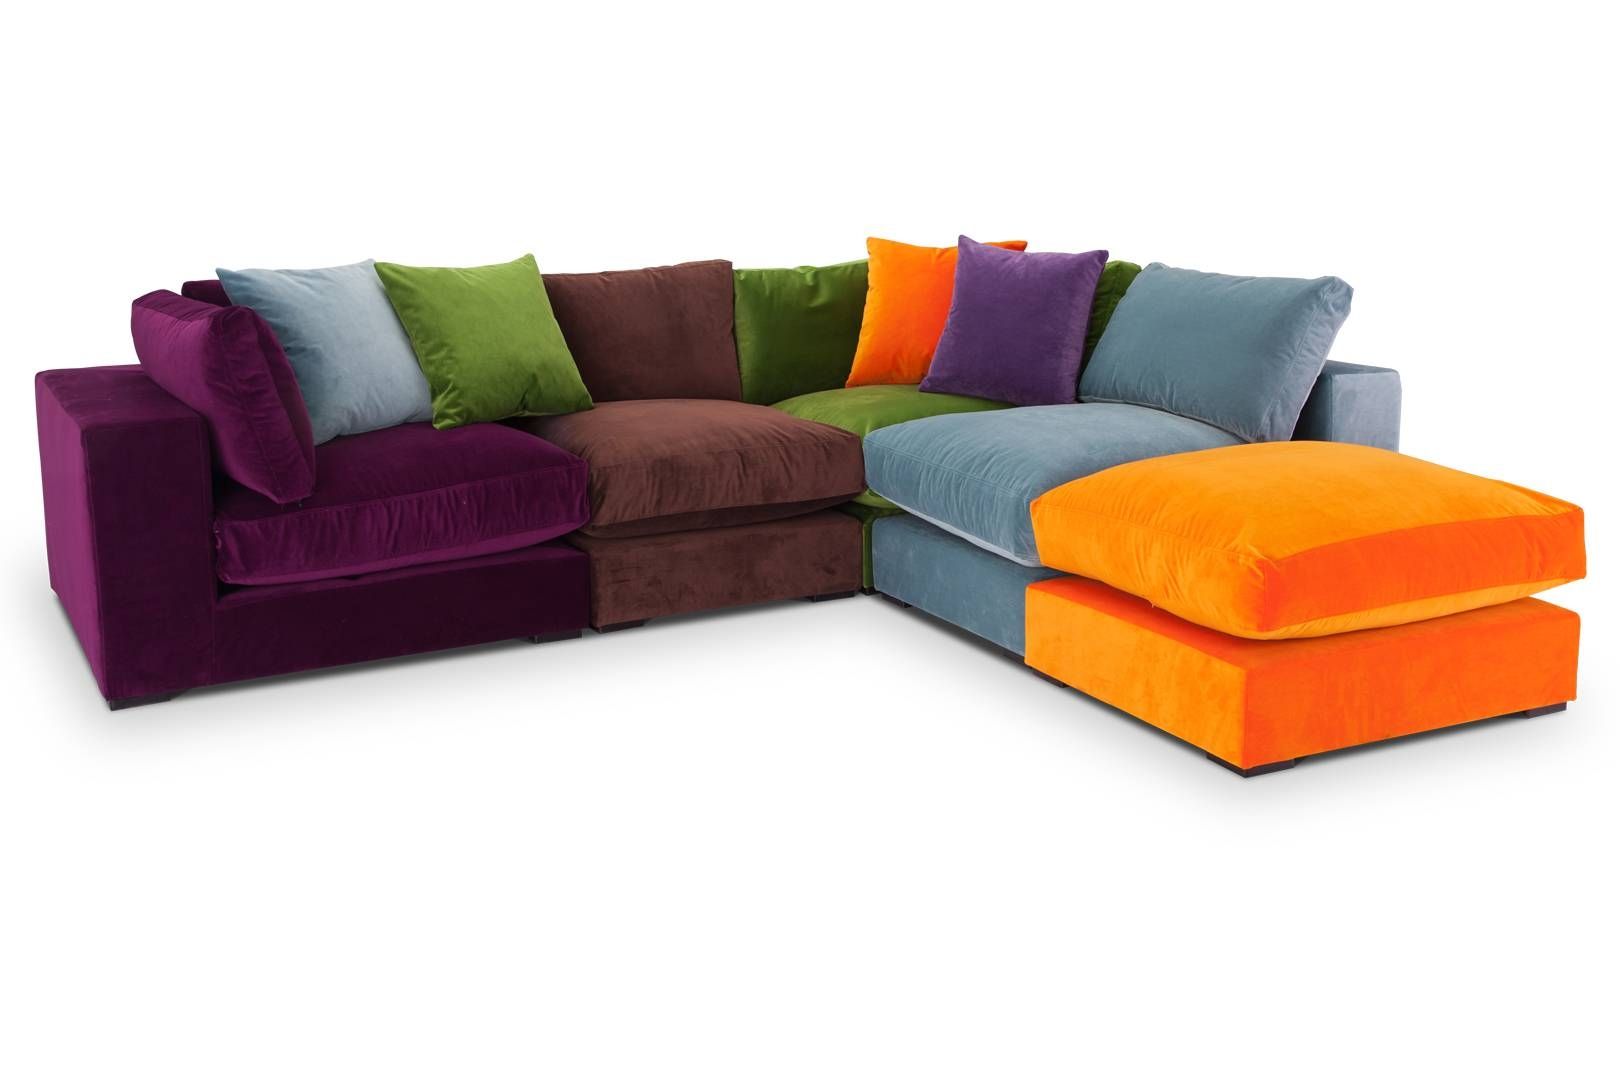 Modular Sofa Rangefreestyle Of Newhaven | Freestyle Of Intended For Modular Sofas (View 12 of 15)